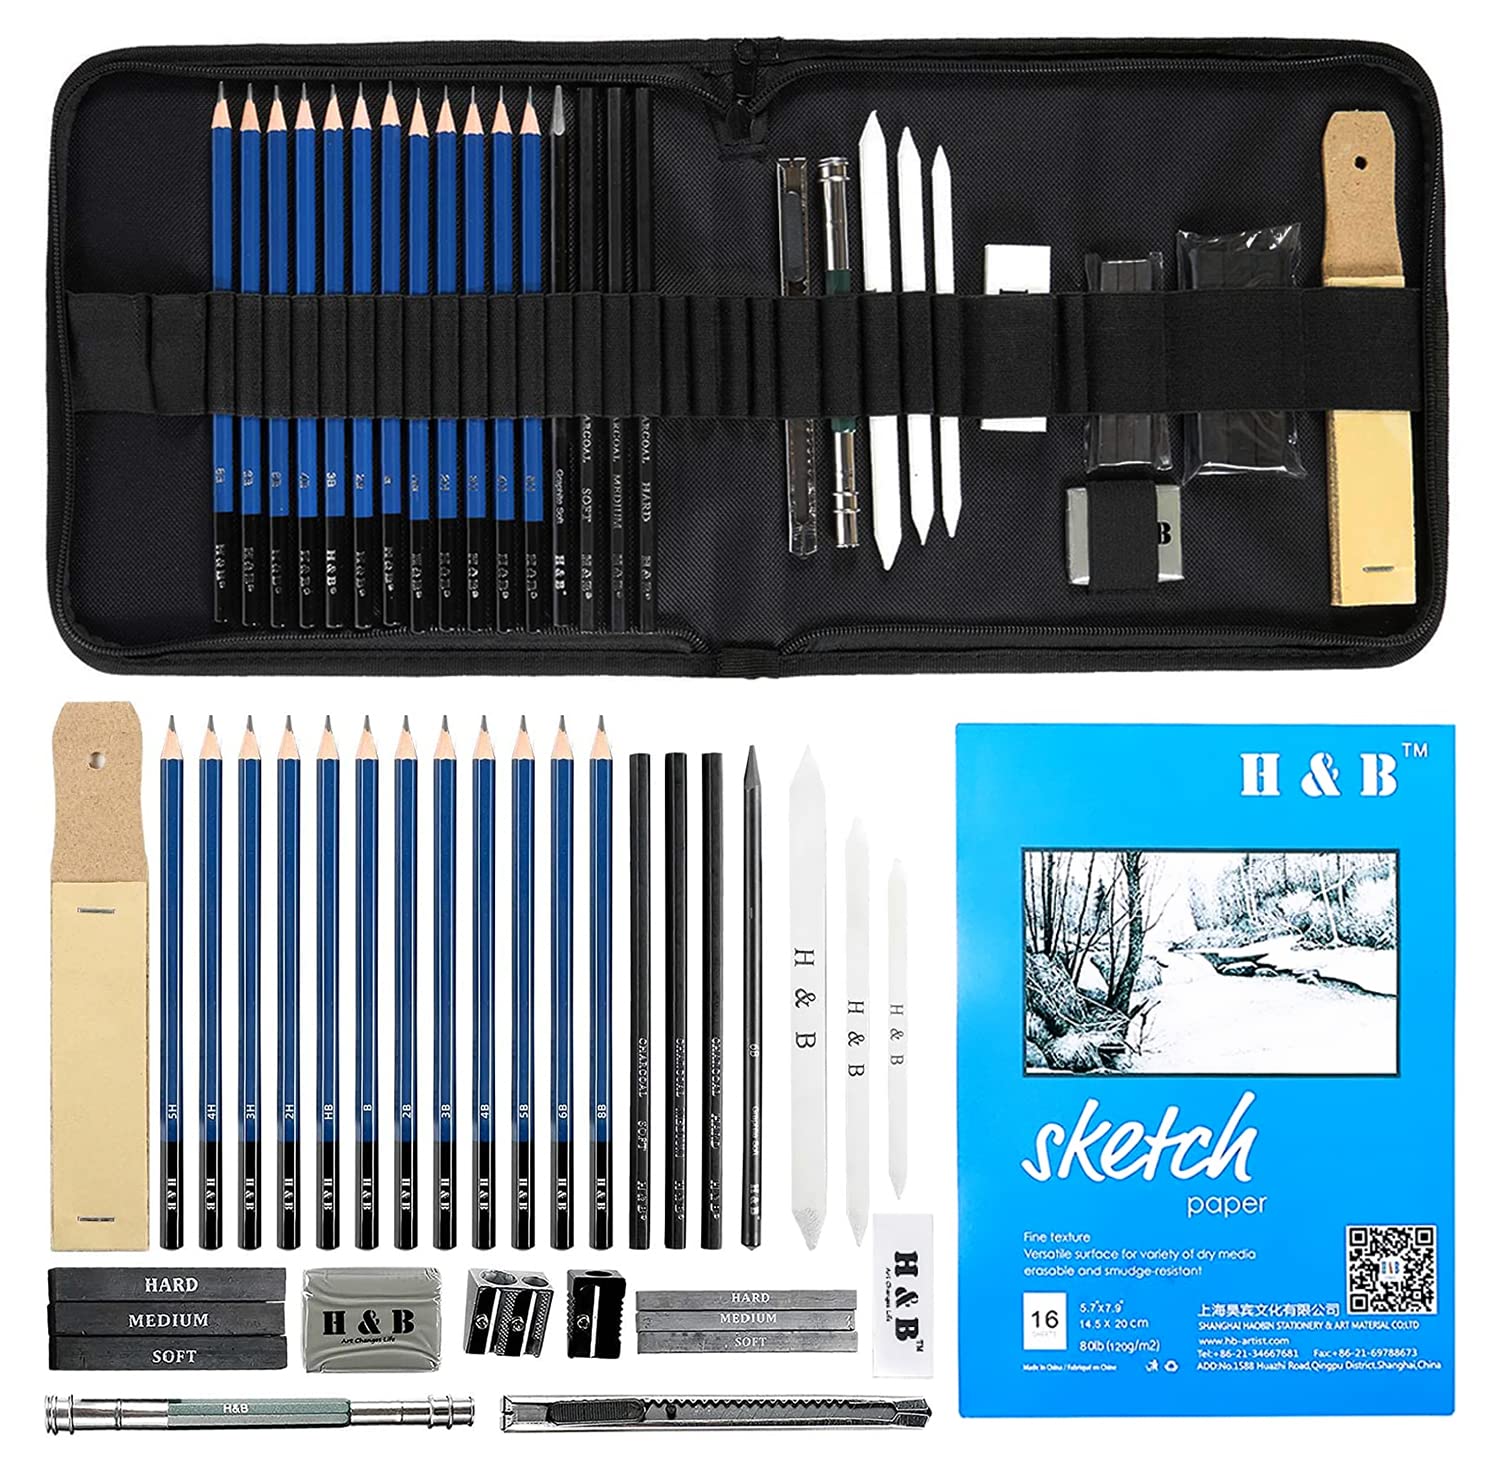 Amazon.com: LUCYCAZ Drawing Kit - Art Supplies for Kids 9-12, Travel Drawing  Set Includes Drawing Pad, Origami Paper, Sketch and Colored Pencils, Eraser  and Sharpener. Sketch Kit for Kids, Teens and Adults